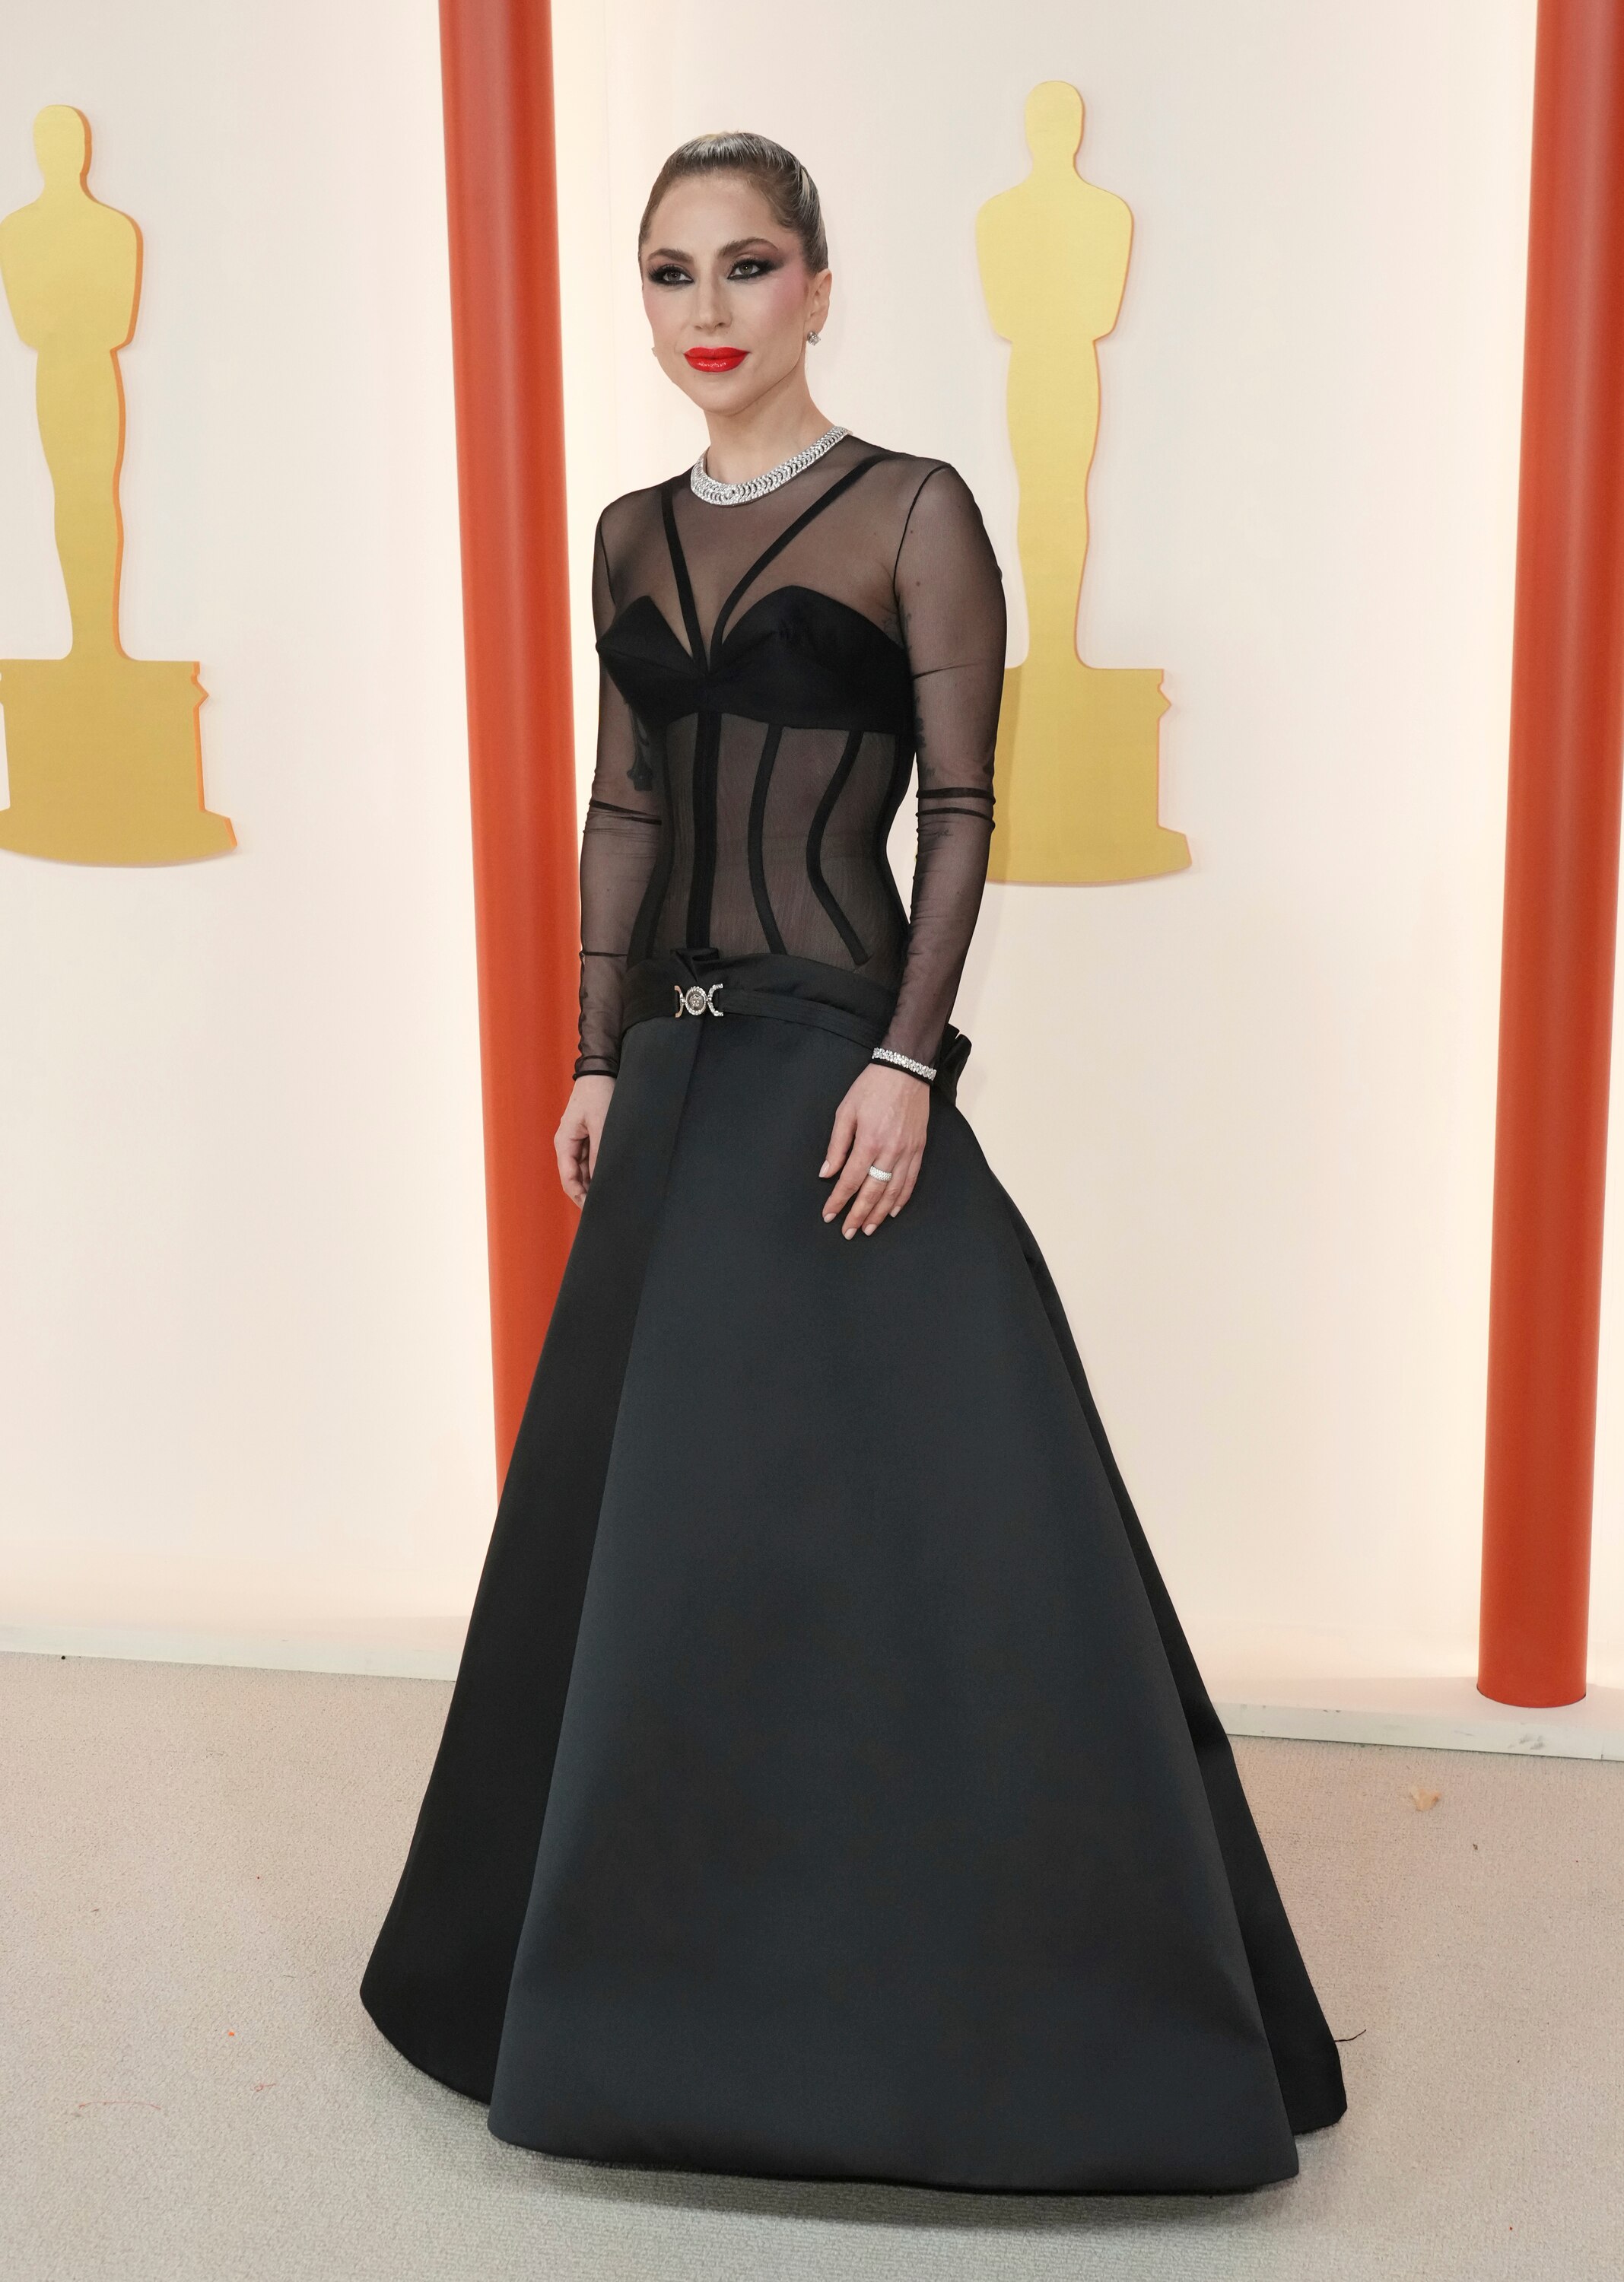 Lady Gaga wearing a floor-length black gown with a silky fully skirt and a sheer top with long sleeves and visible boning